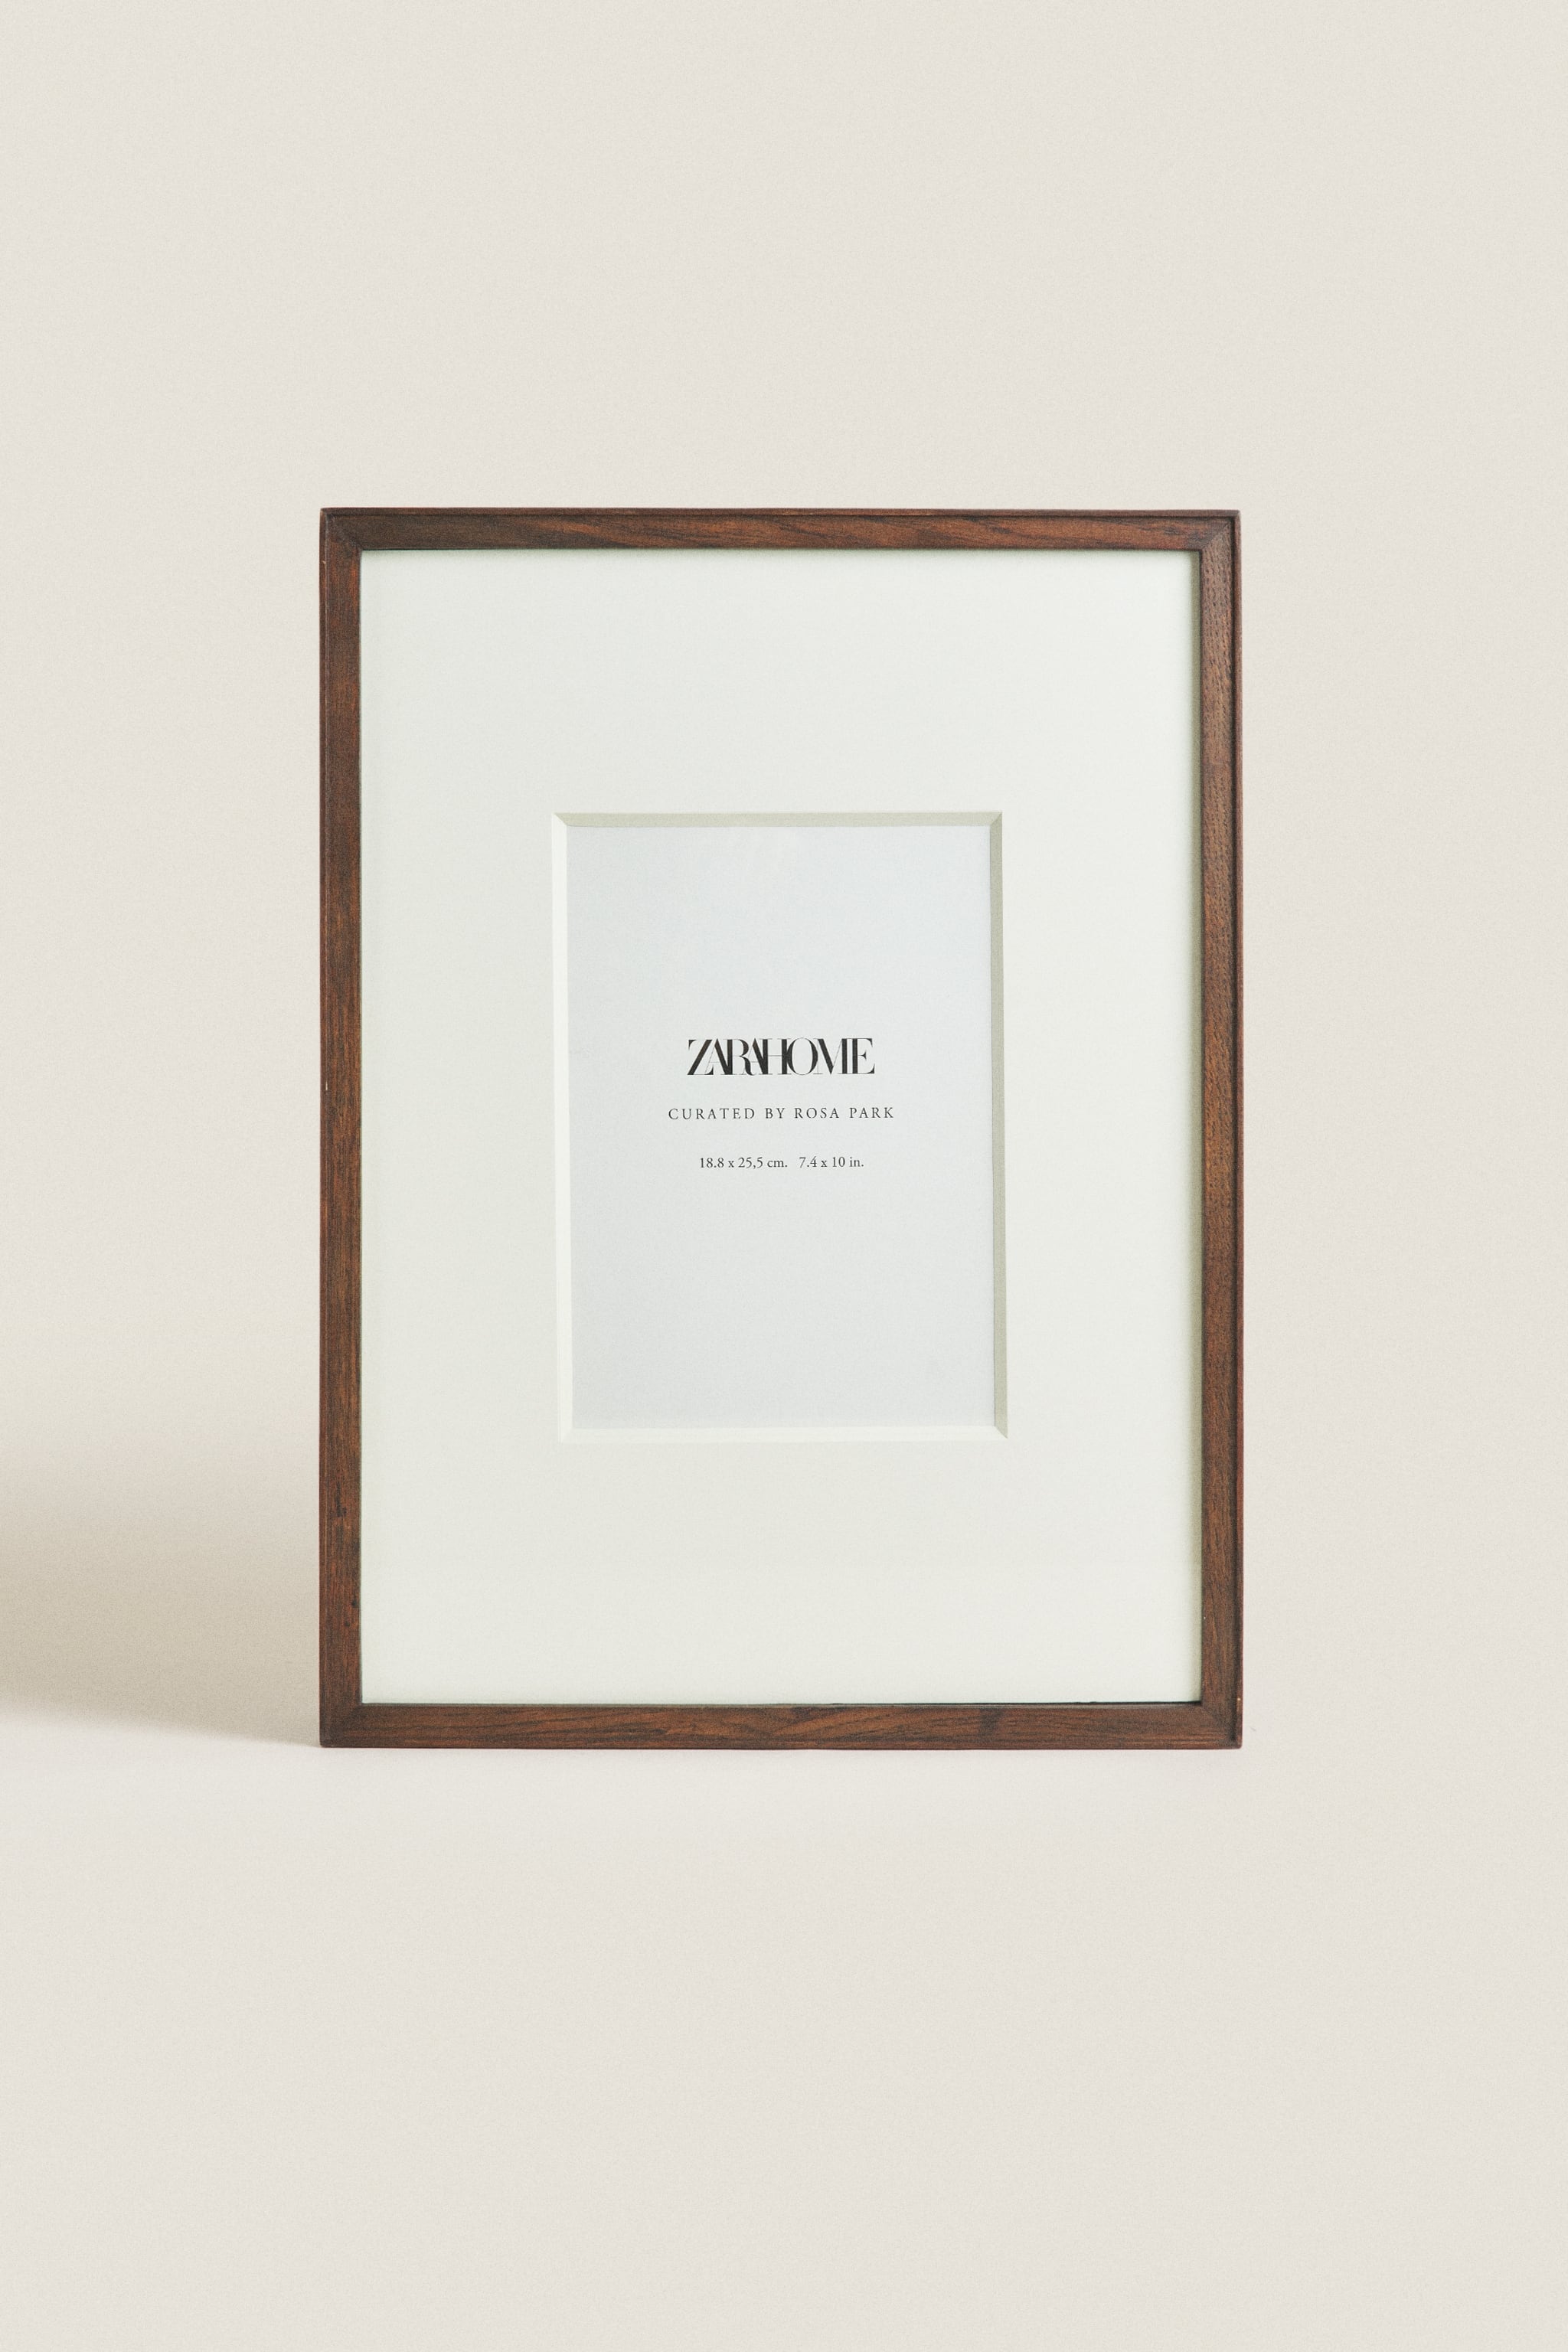 CLASSIC PHOTO FRAME BY ROSA PARK